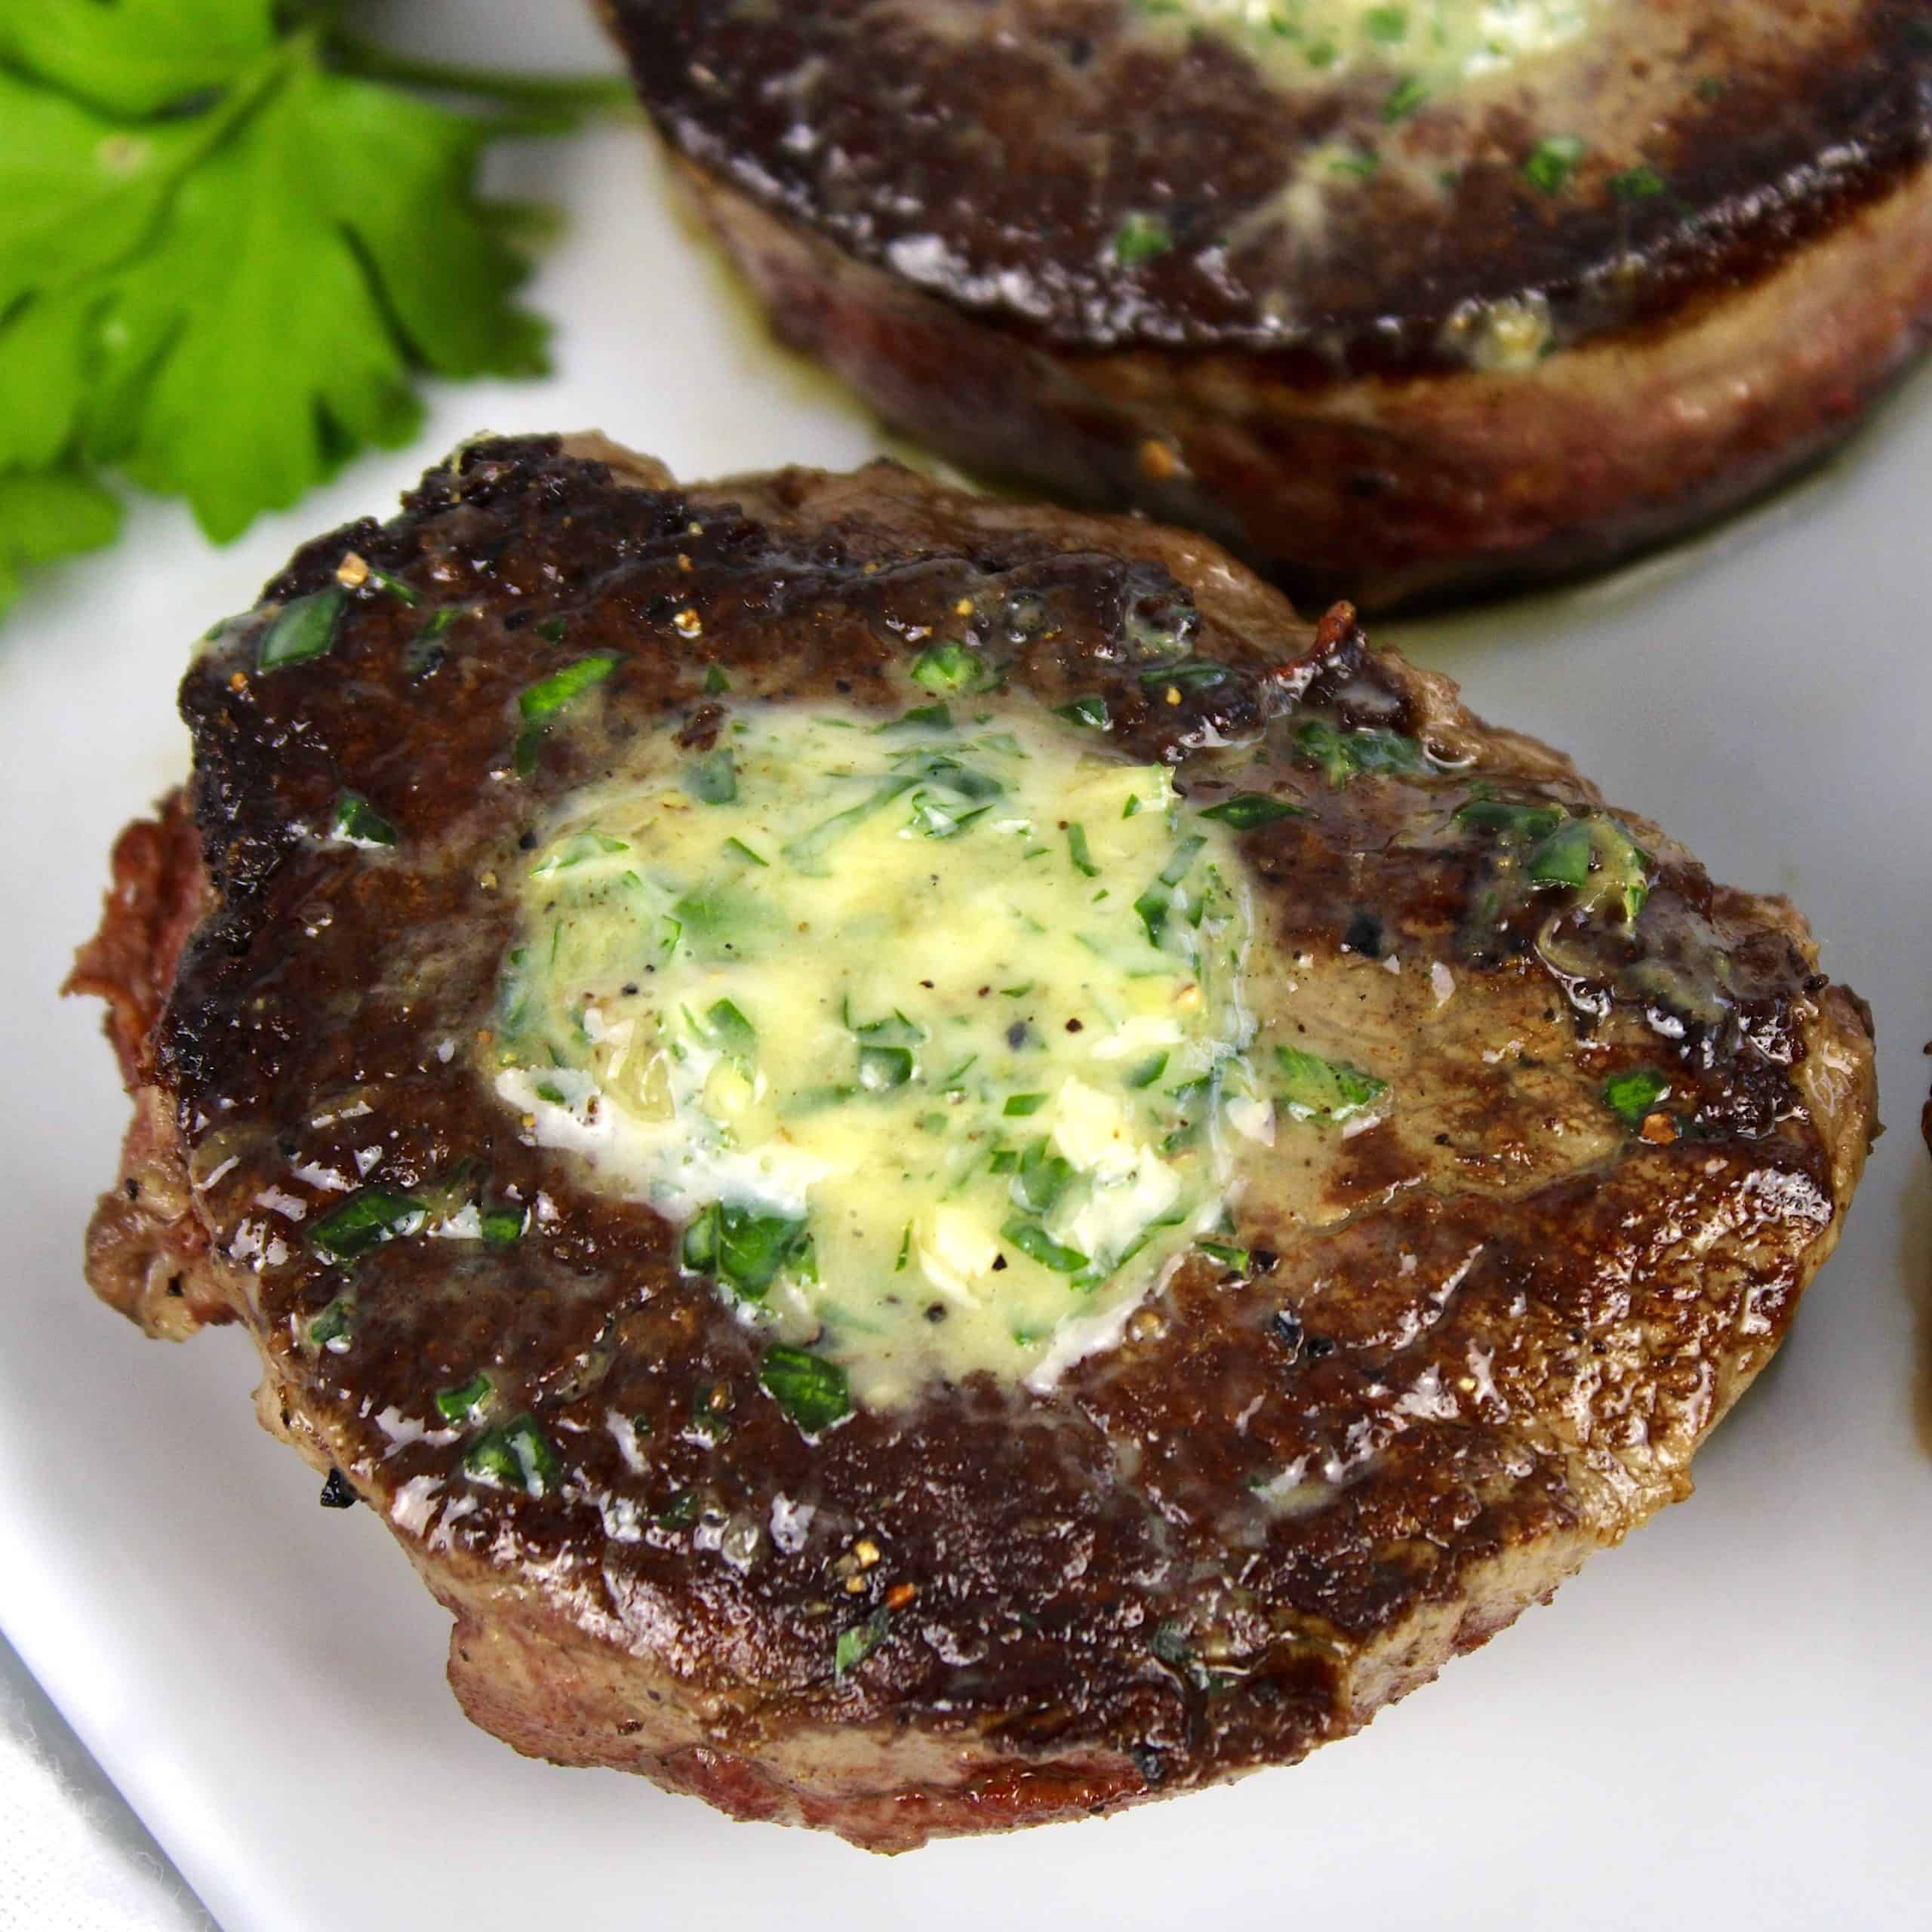 Pan Seared Steak With Compound Butter - Grillseeker